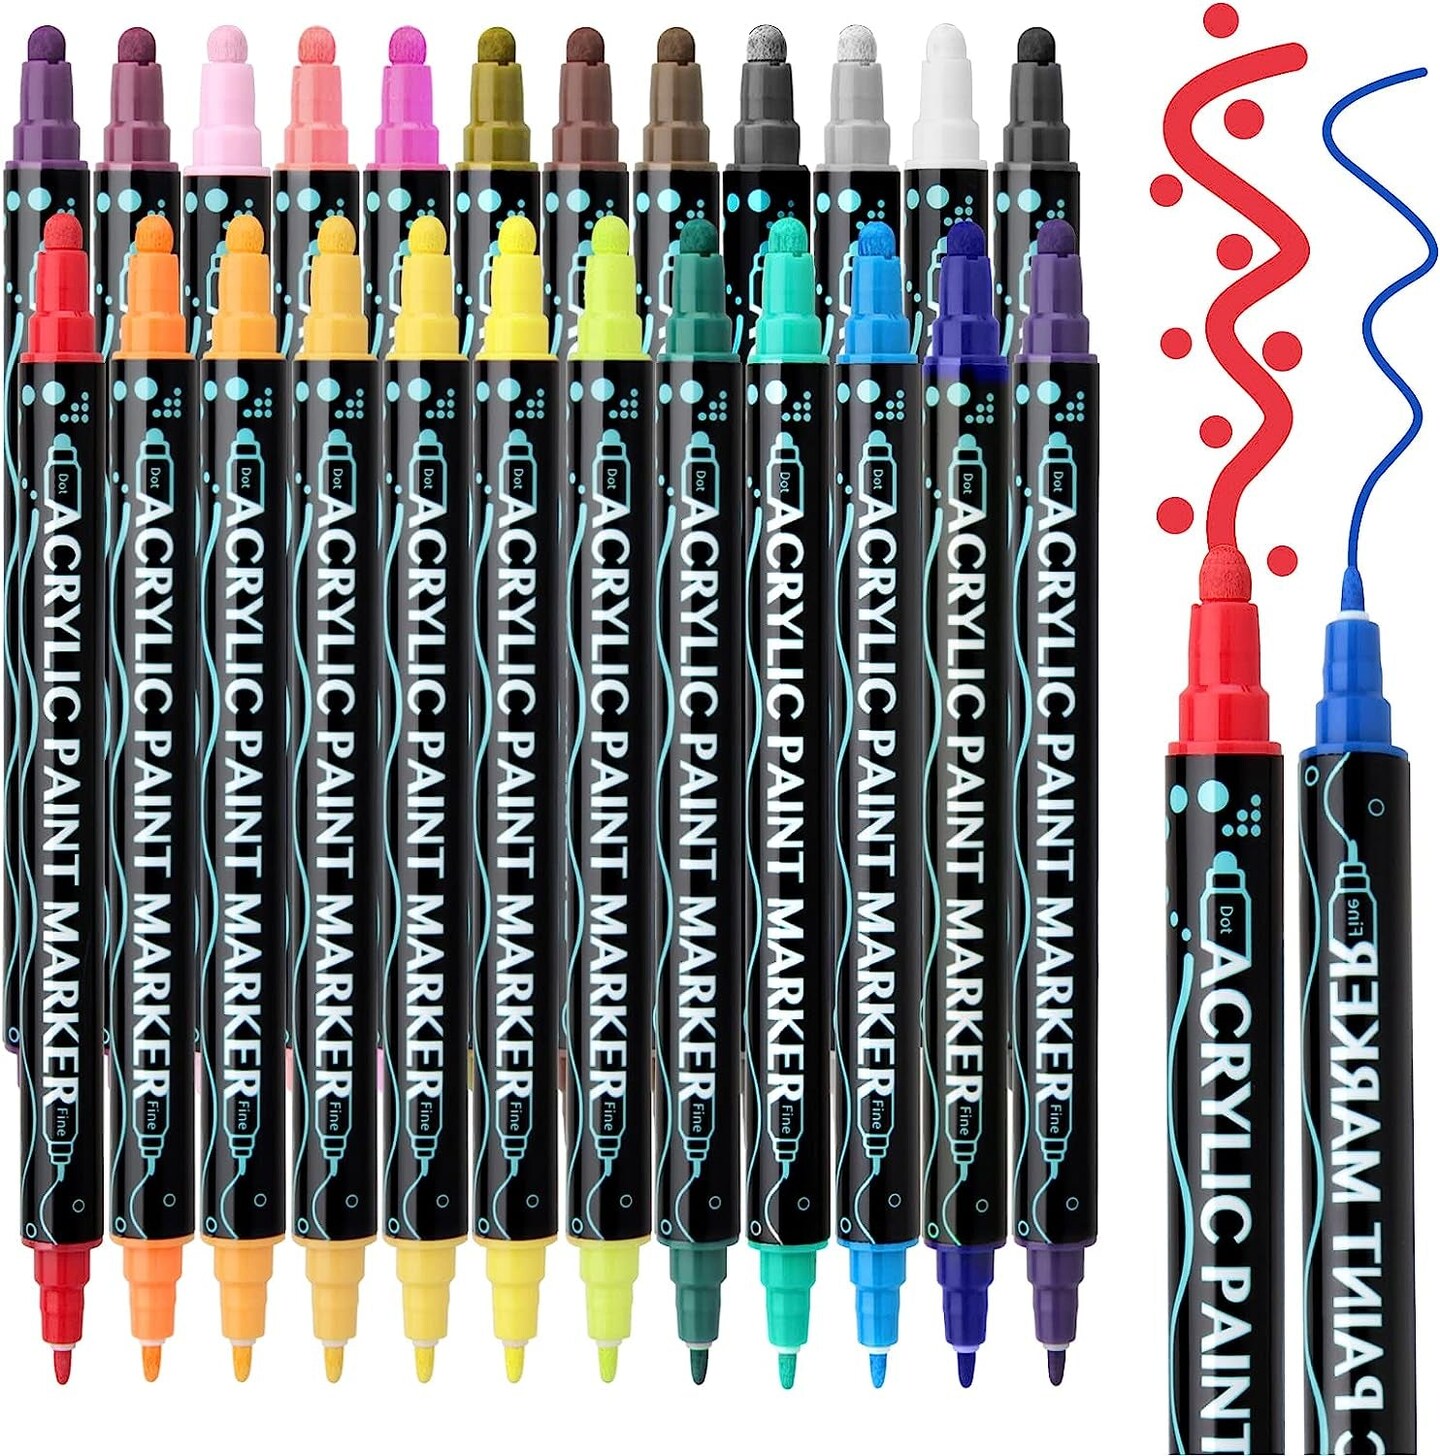 Vibrant Colored Sharpies for Creative Projects